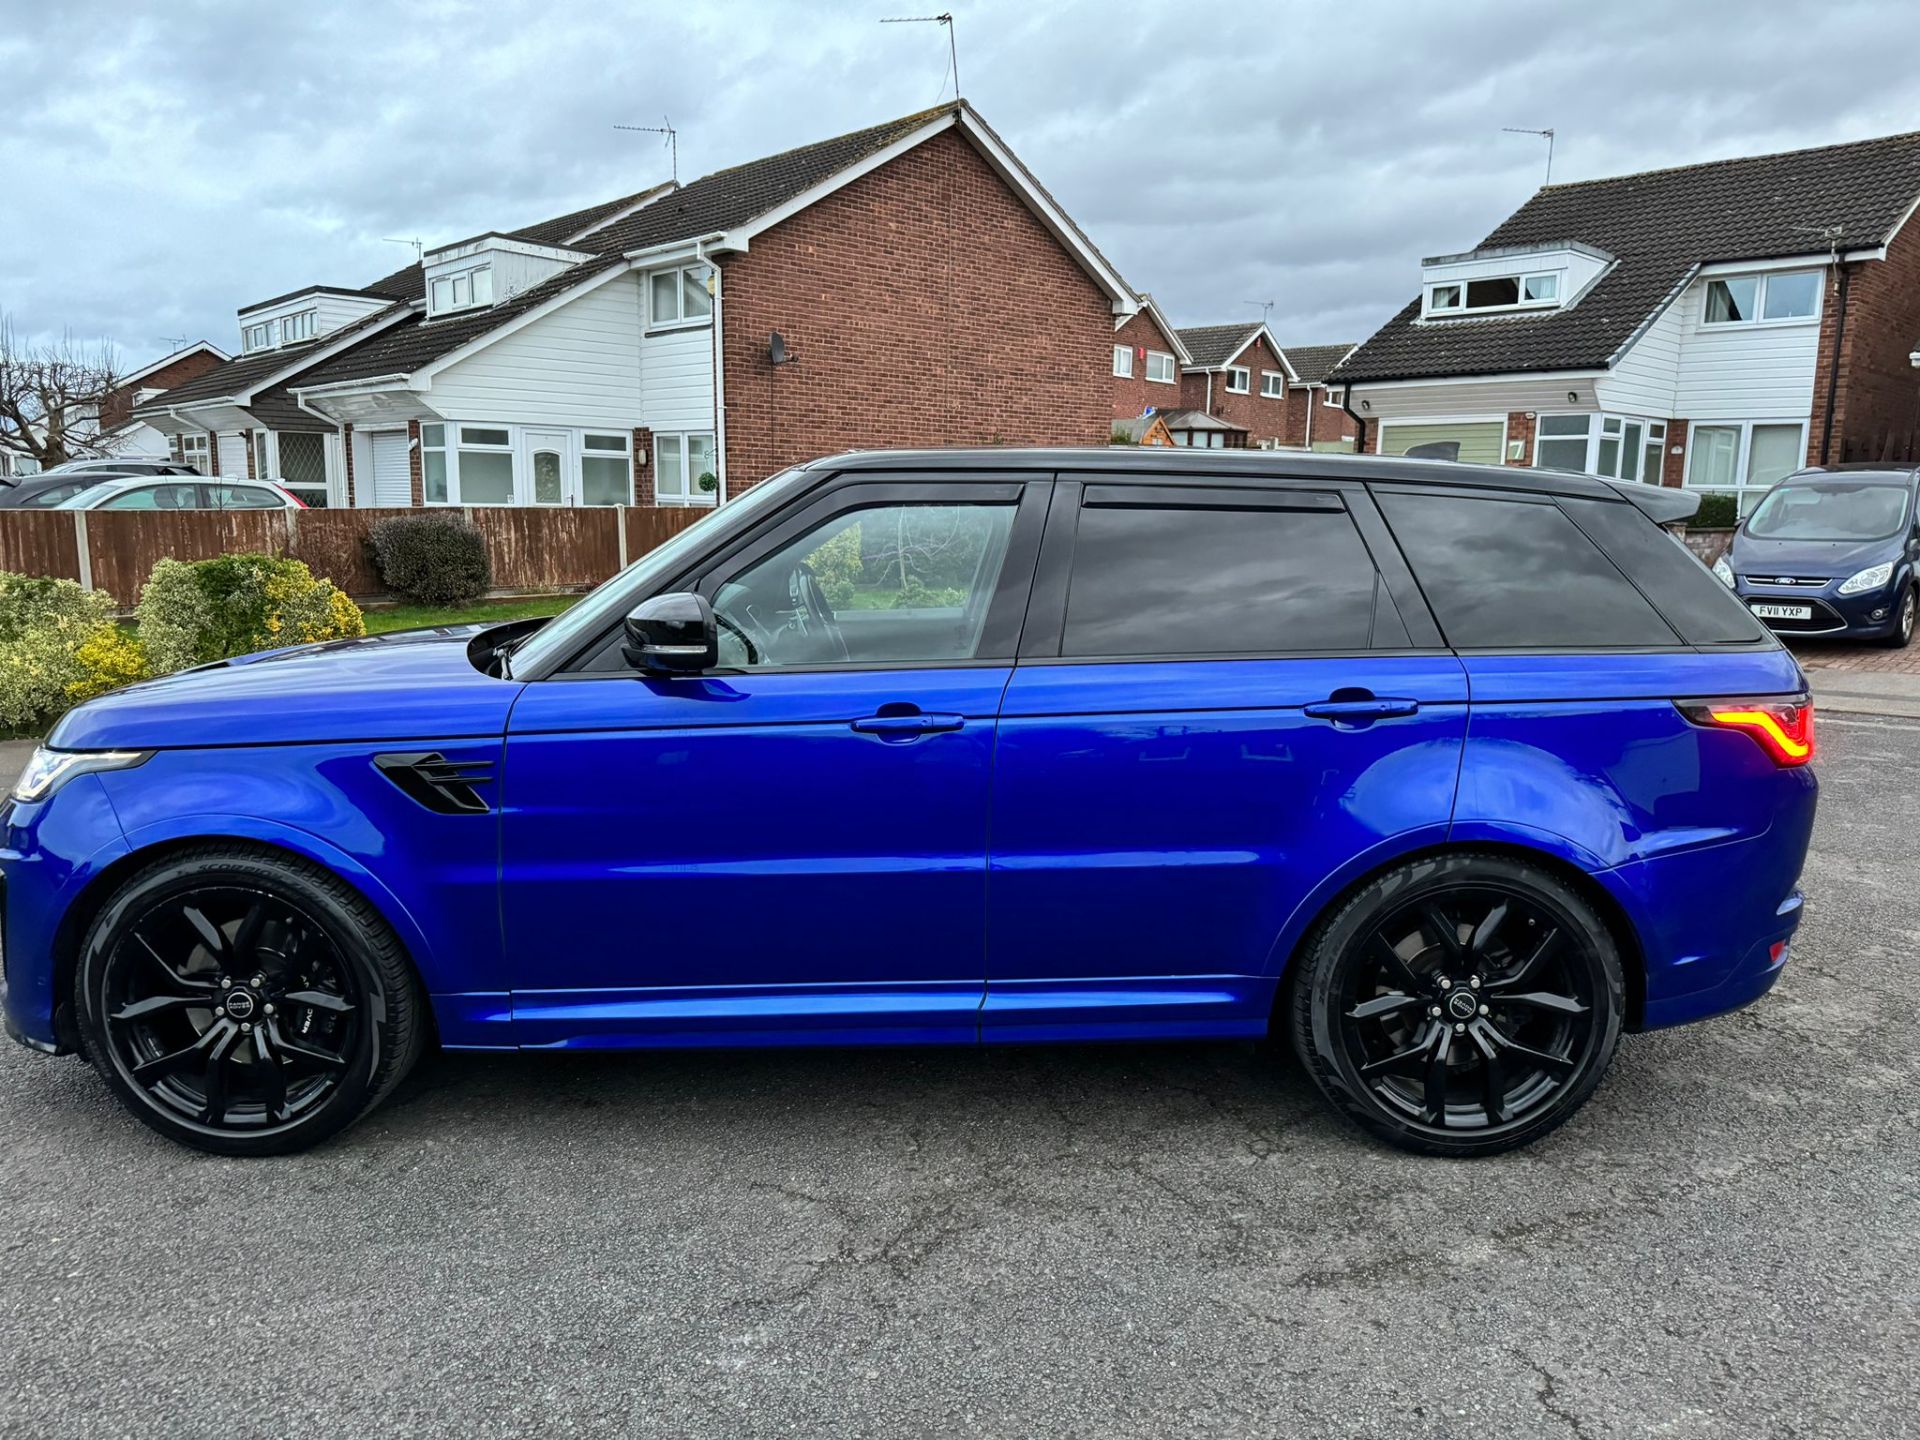 2018 18 RANGE ROVER SVR - 62K MILES WITH FULL LAND ROVER HISTORY - EXTREMELY CLEAN EXAMPLE - Bild 5 aus 10